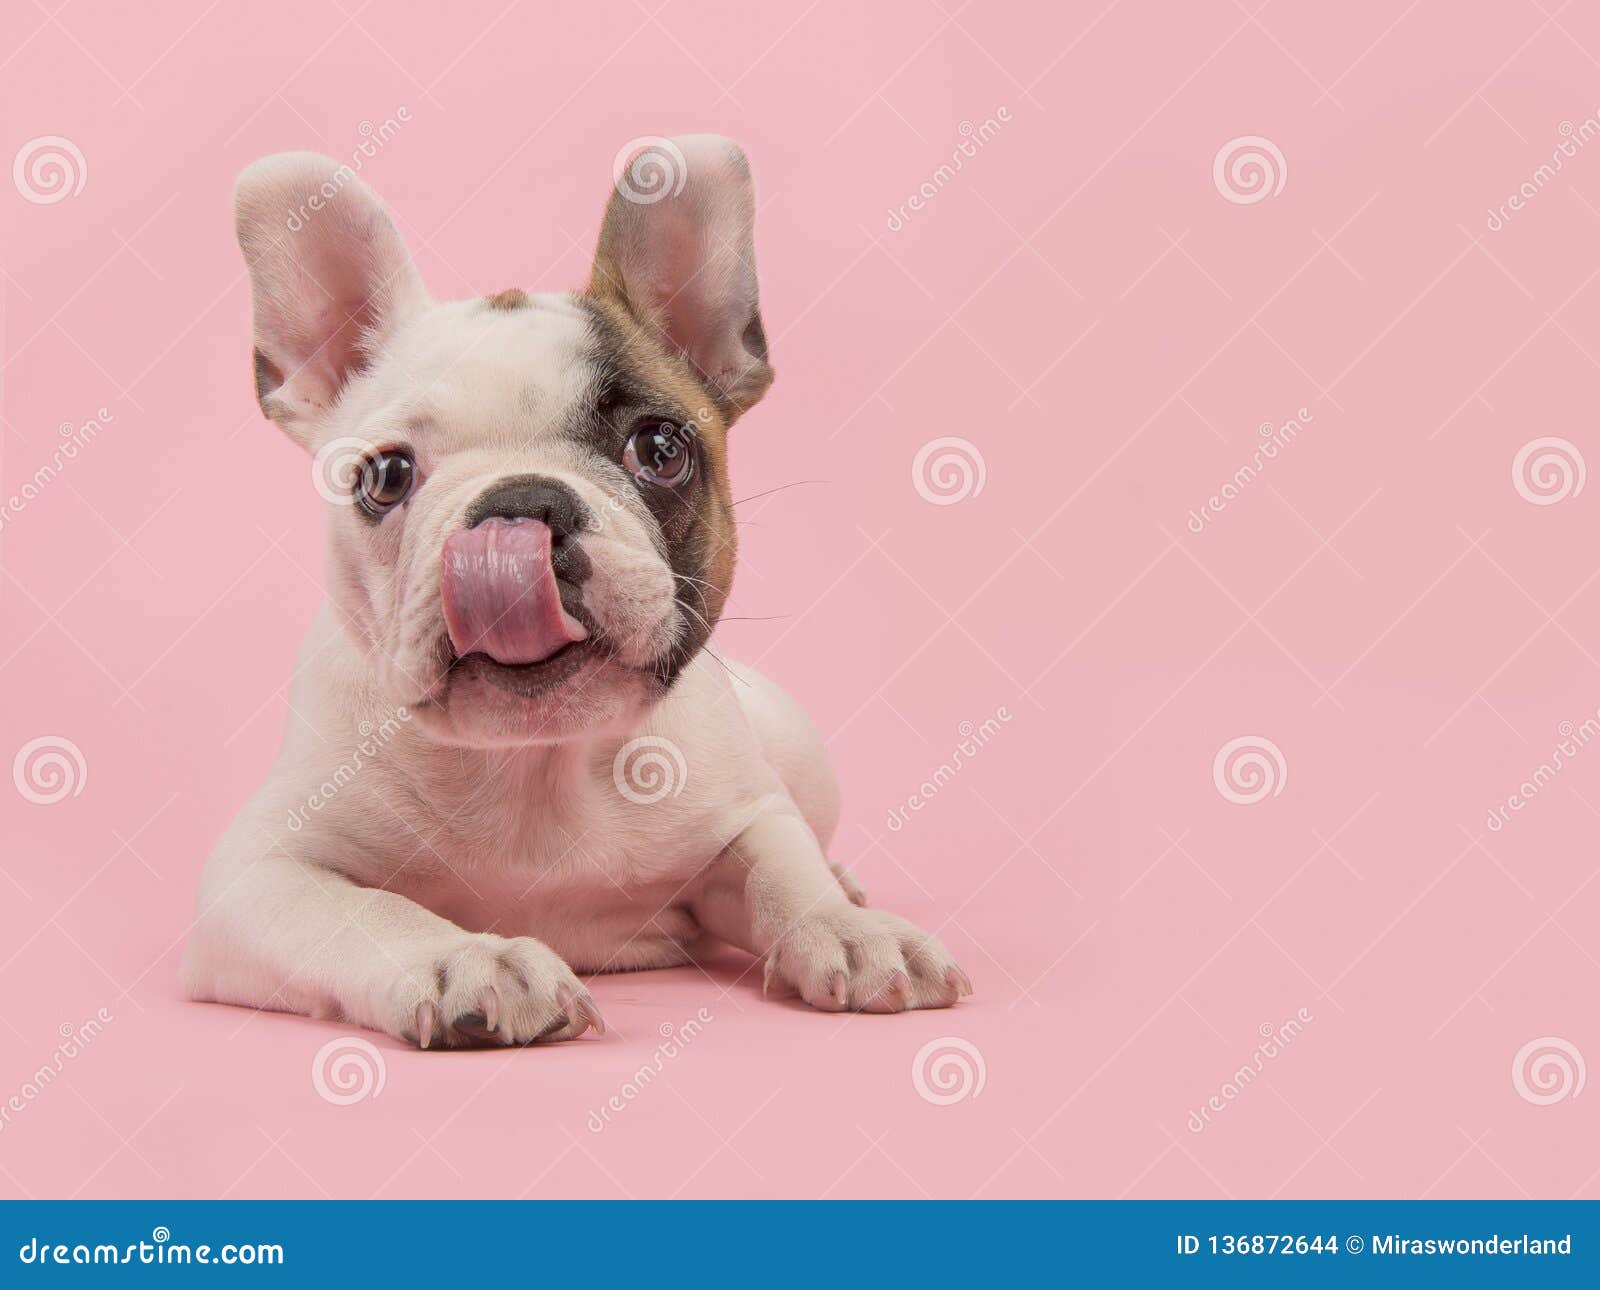 French Bulldog Puppy Lying Down On A Pink Background